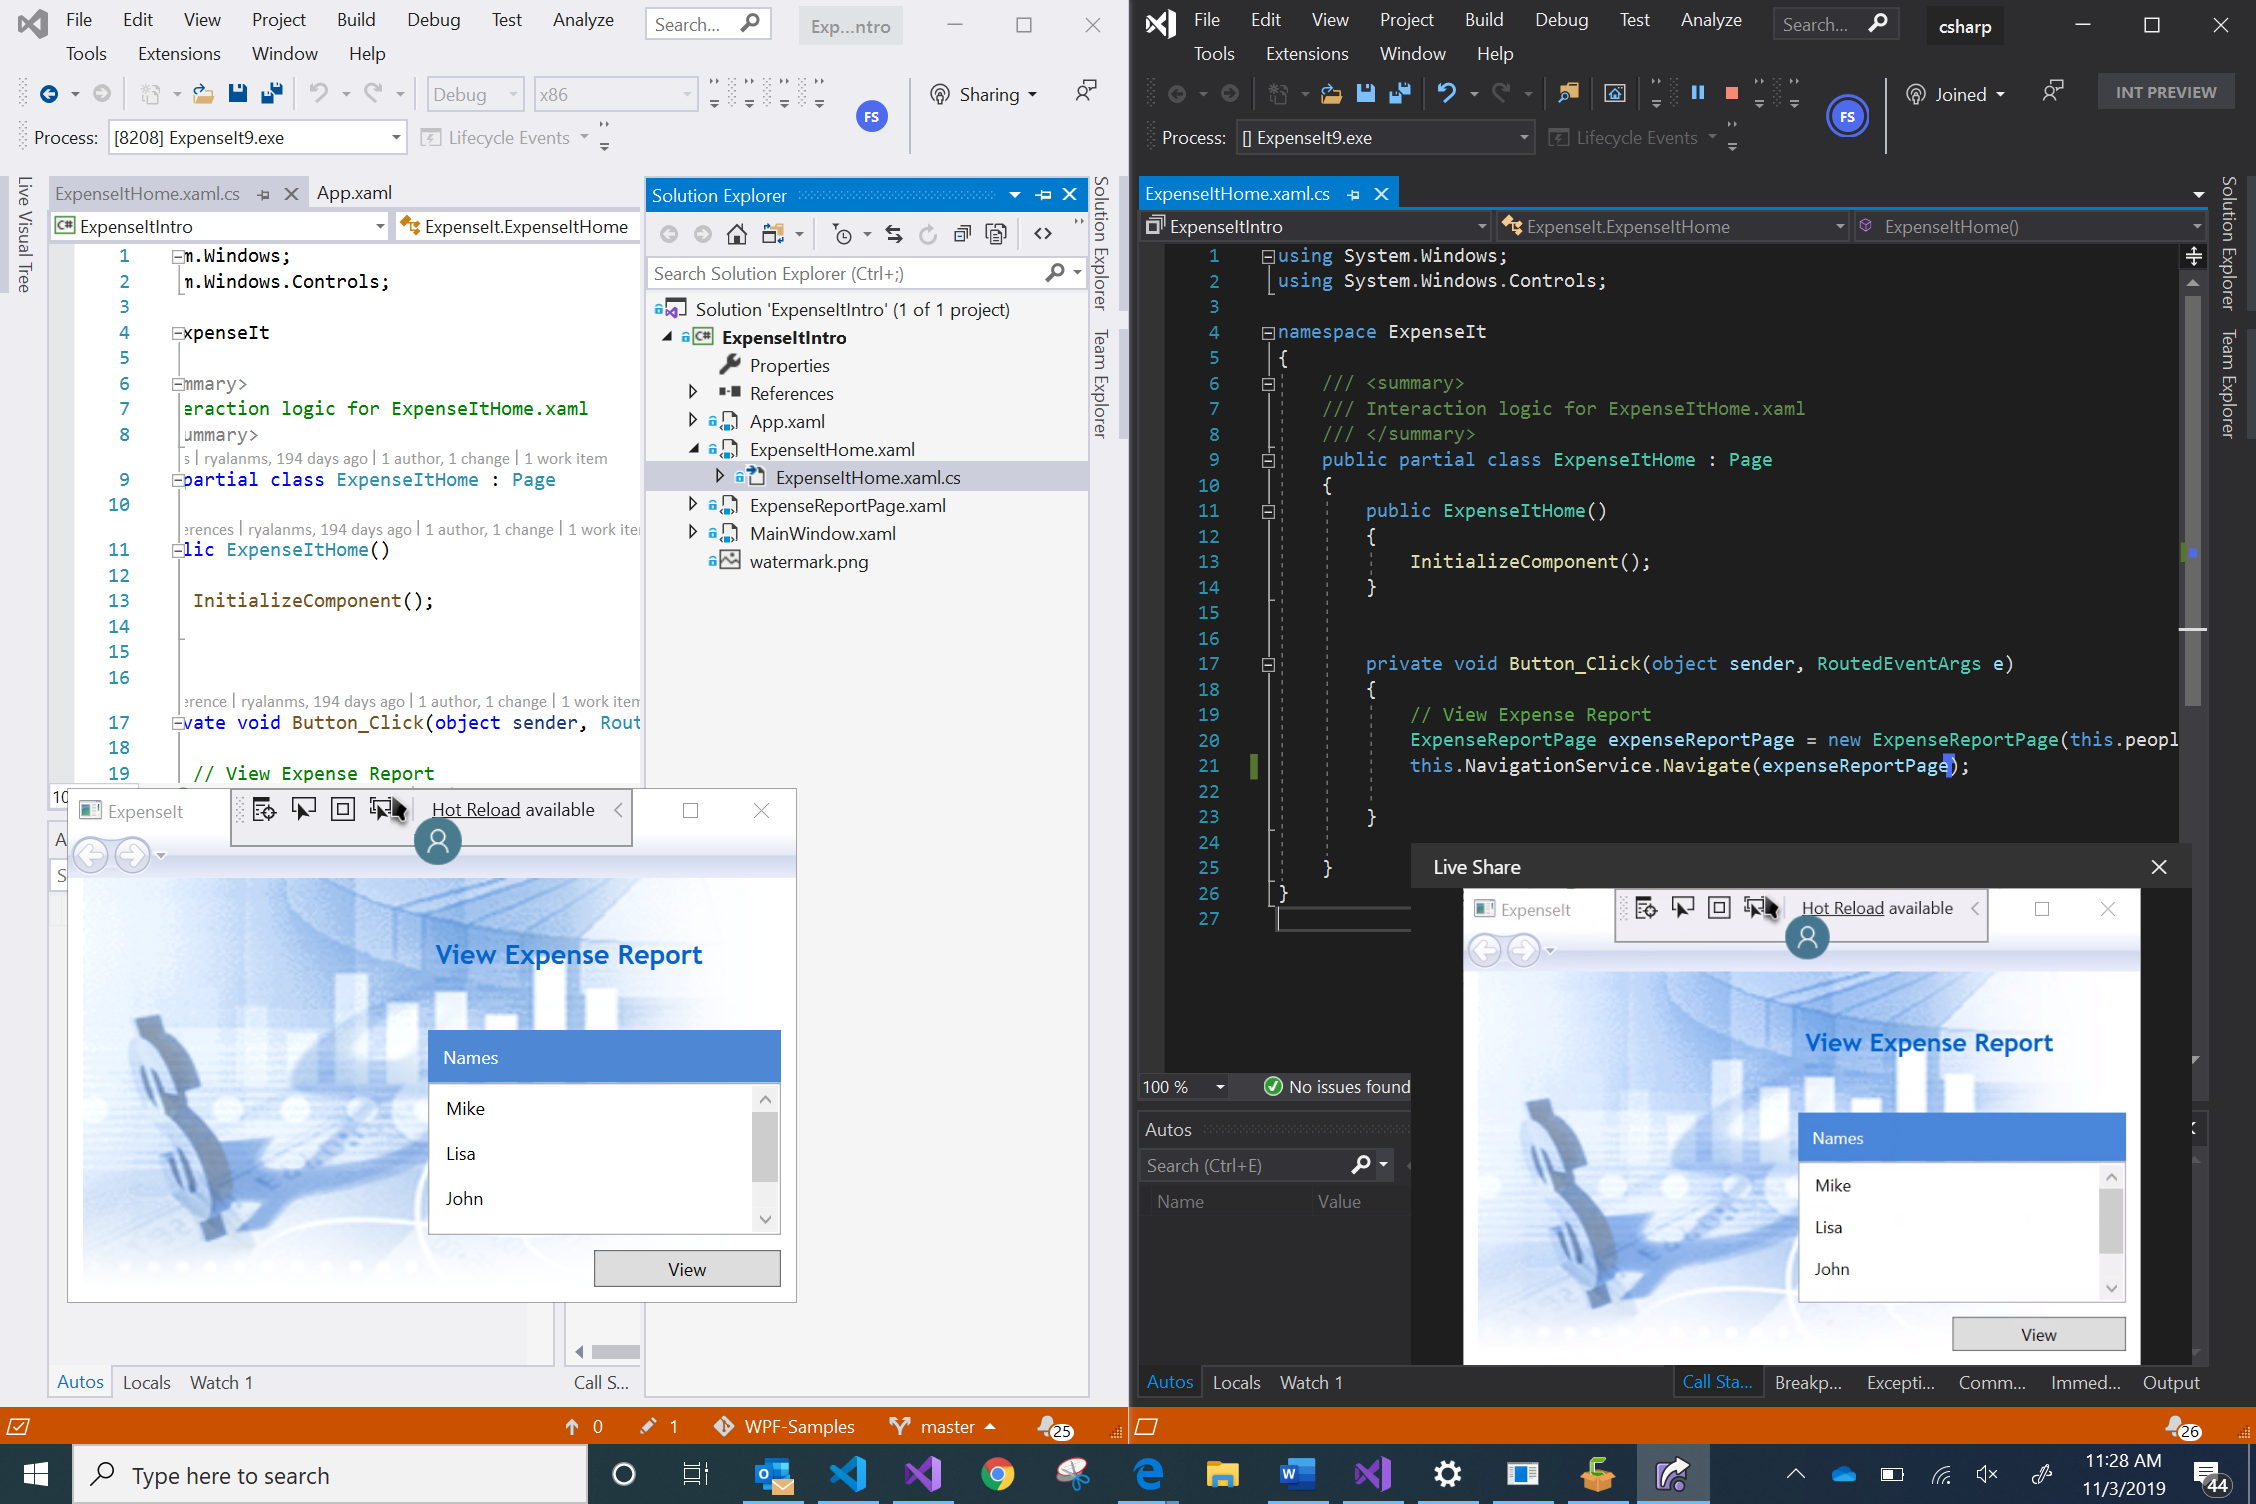 Re Imagining Collaboration For Visual Studio With Live Share App Casting And Contacts Visual Studio Blog